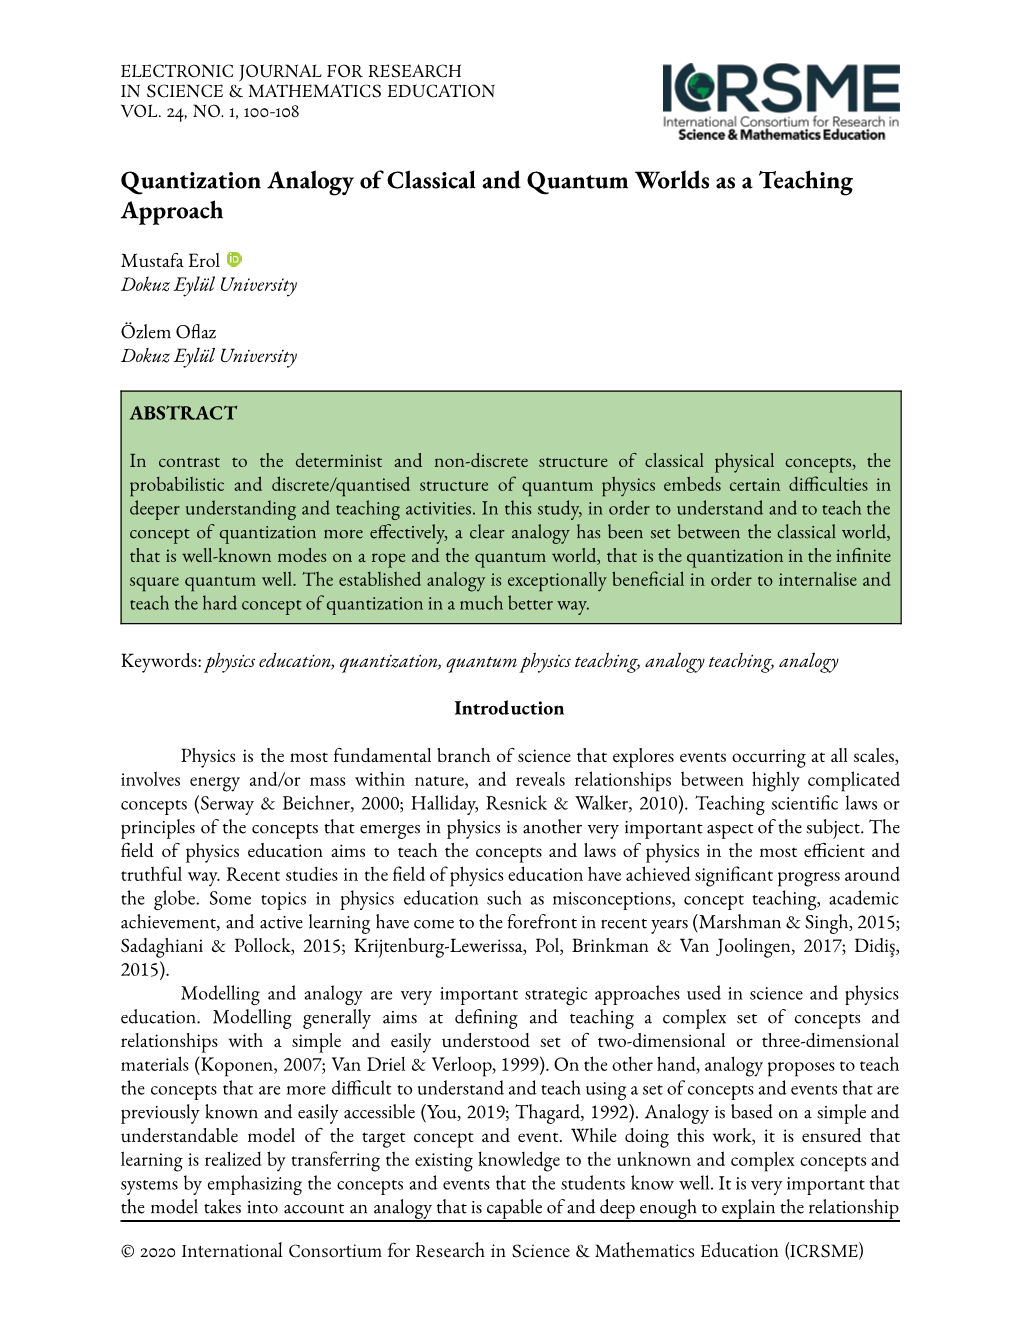 Quantization Analogy of Classical and Quantum Worlds As a Teaching Approach